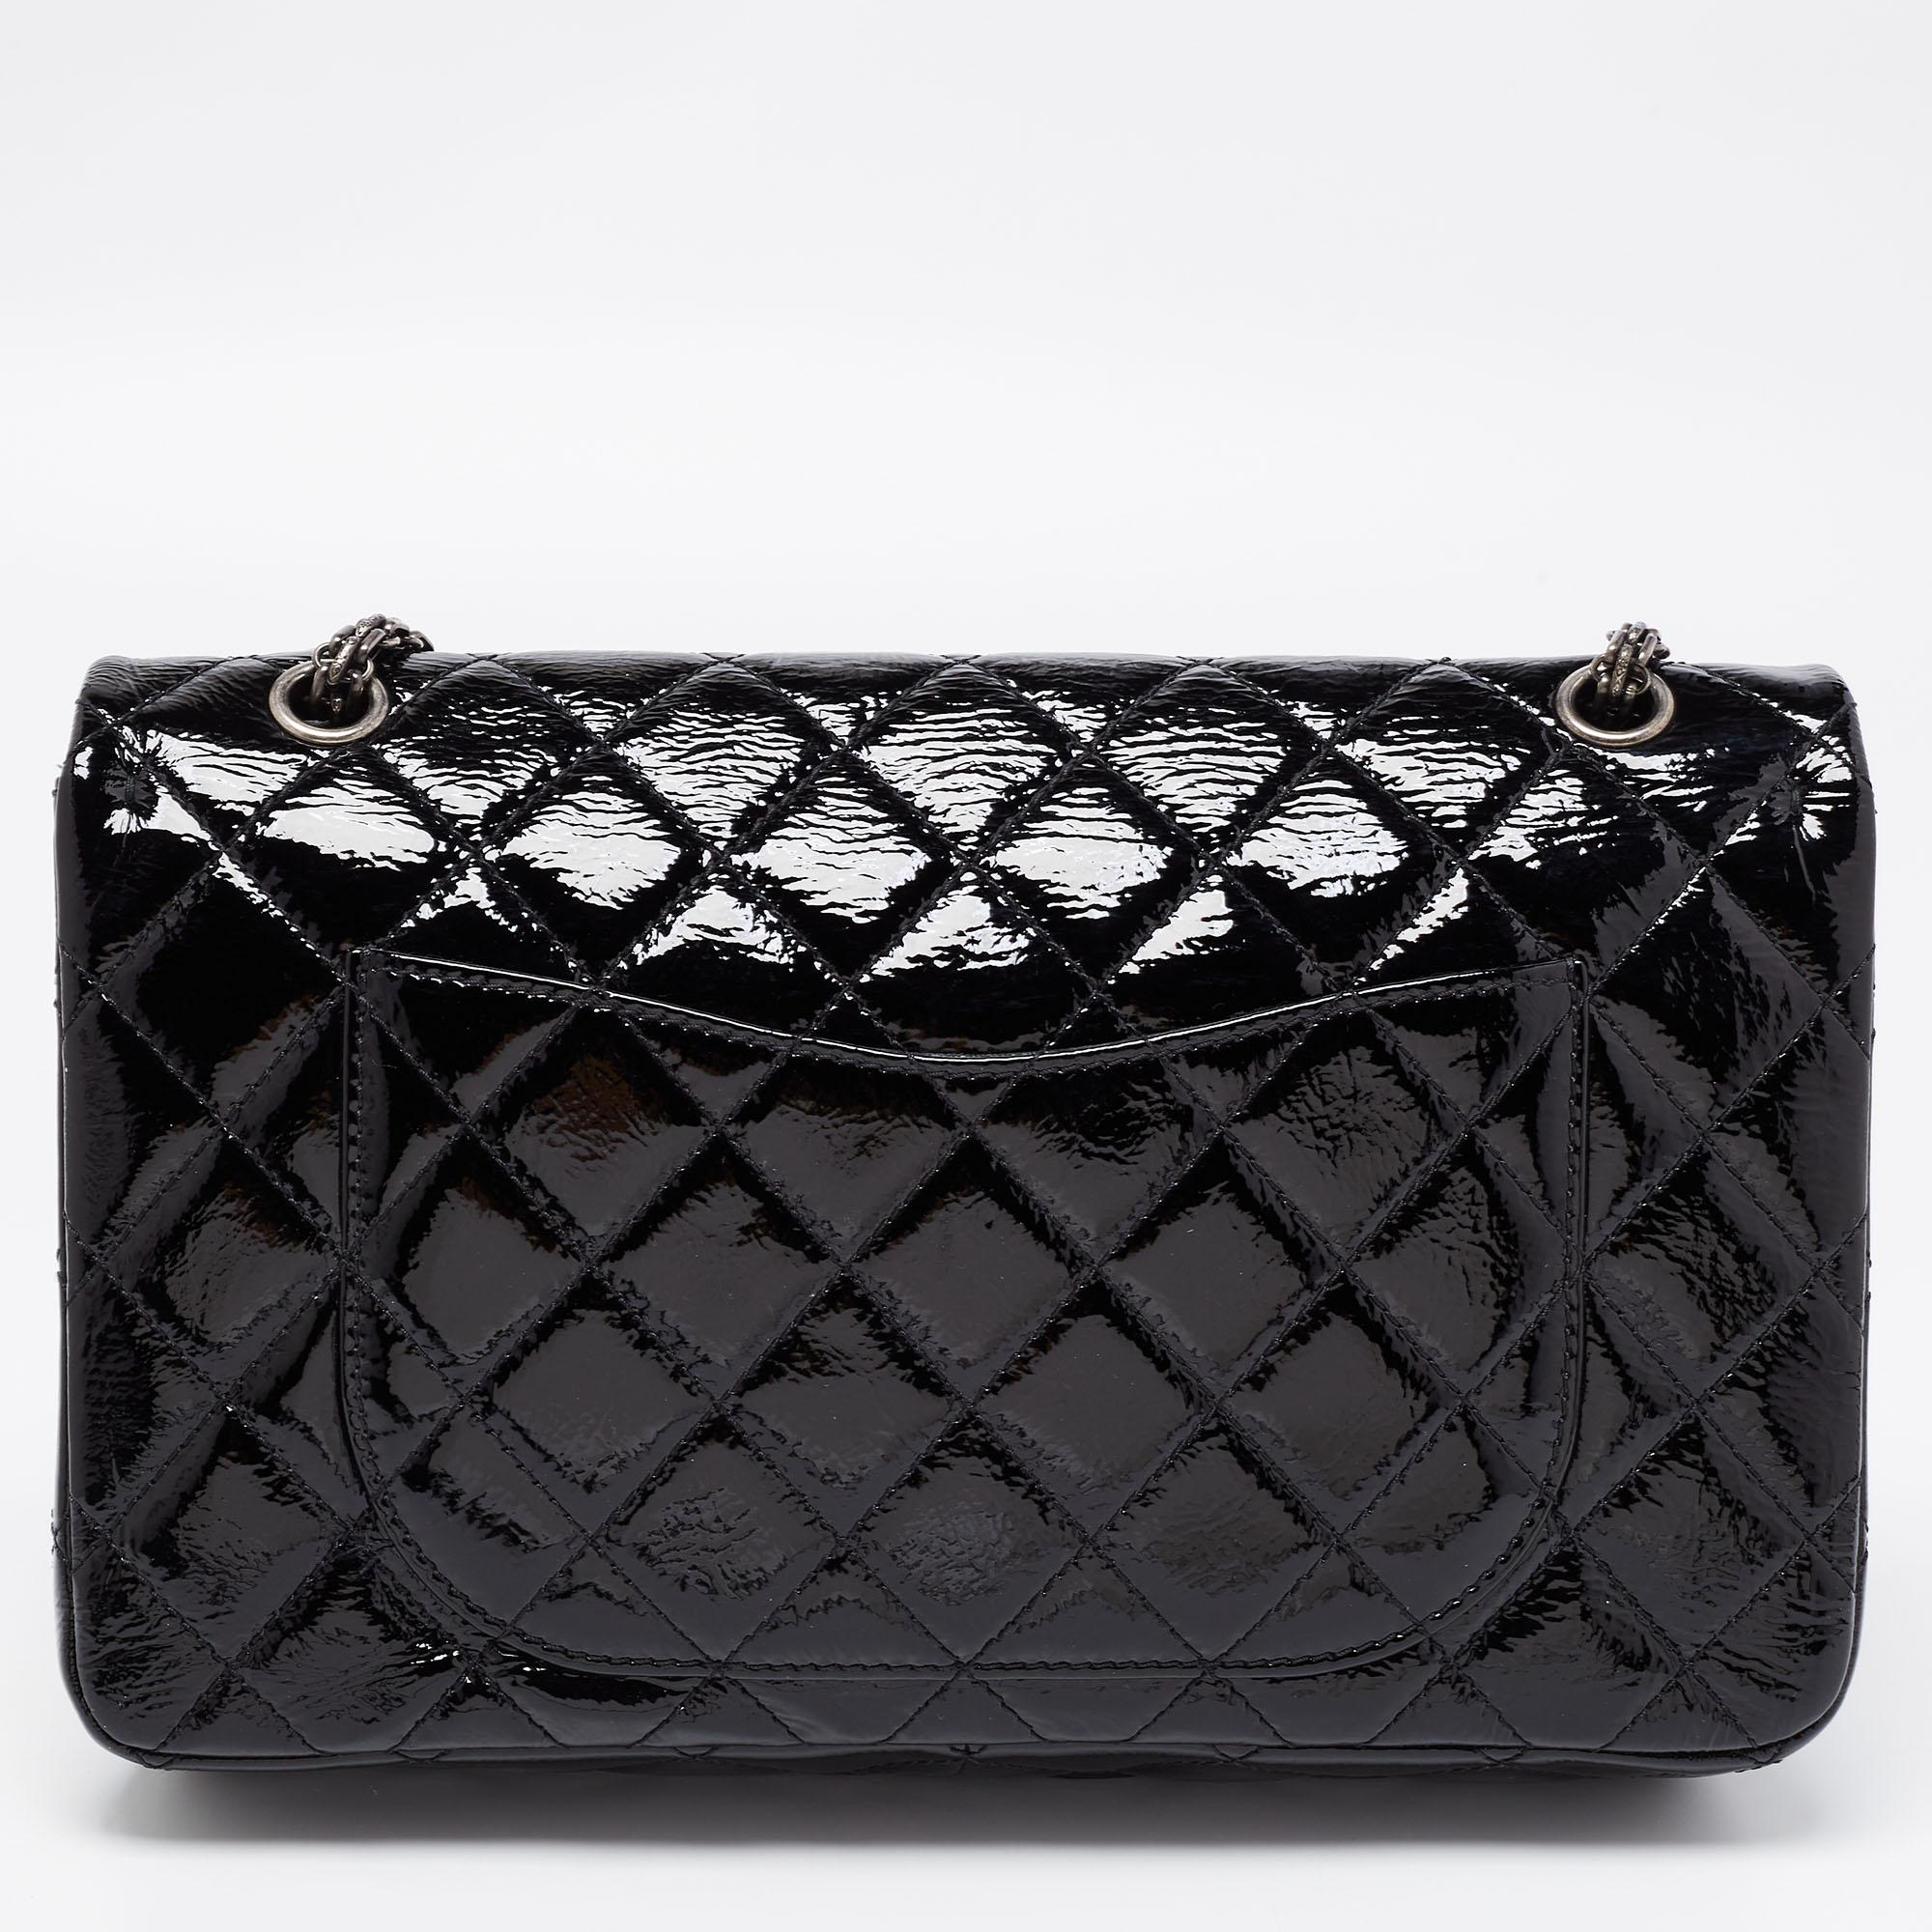 Introduce Chanel's irreplaceable style to your closet with this Reissue 2.55 Classic 227 Flap bag. Crafted using black patent leather, the bag has a signature quilted exterior, the Mademoiselle lock on the front, and a leather-lined interior.